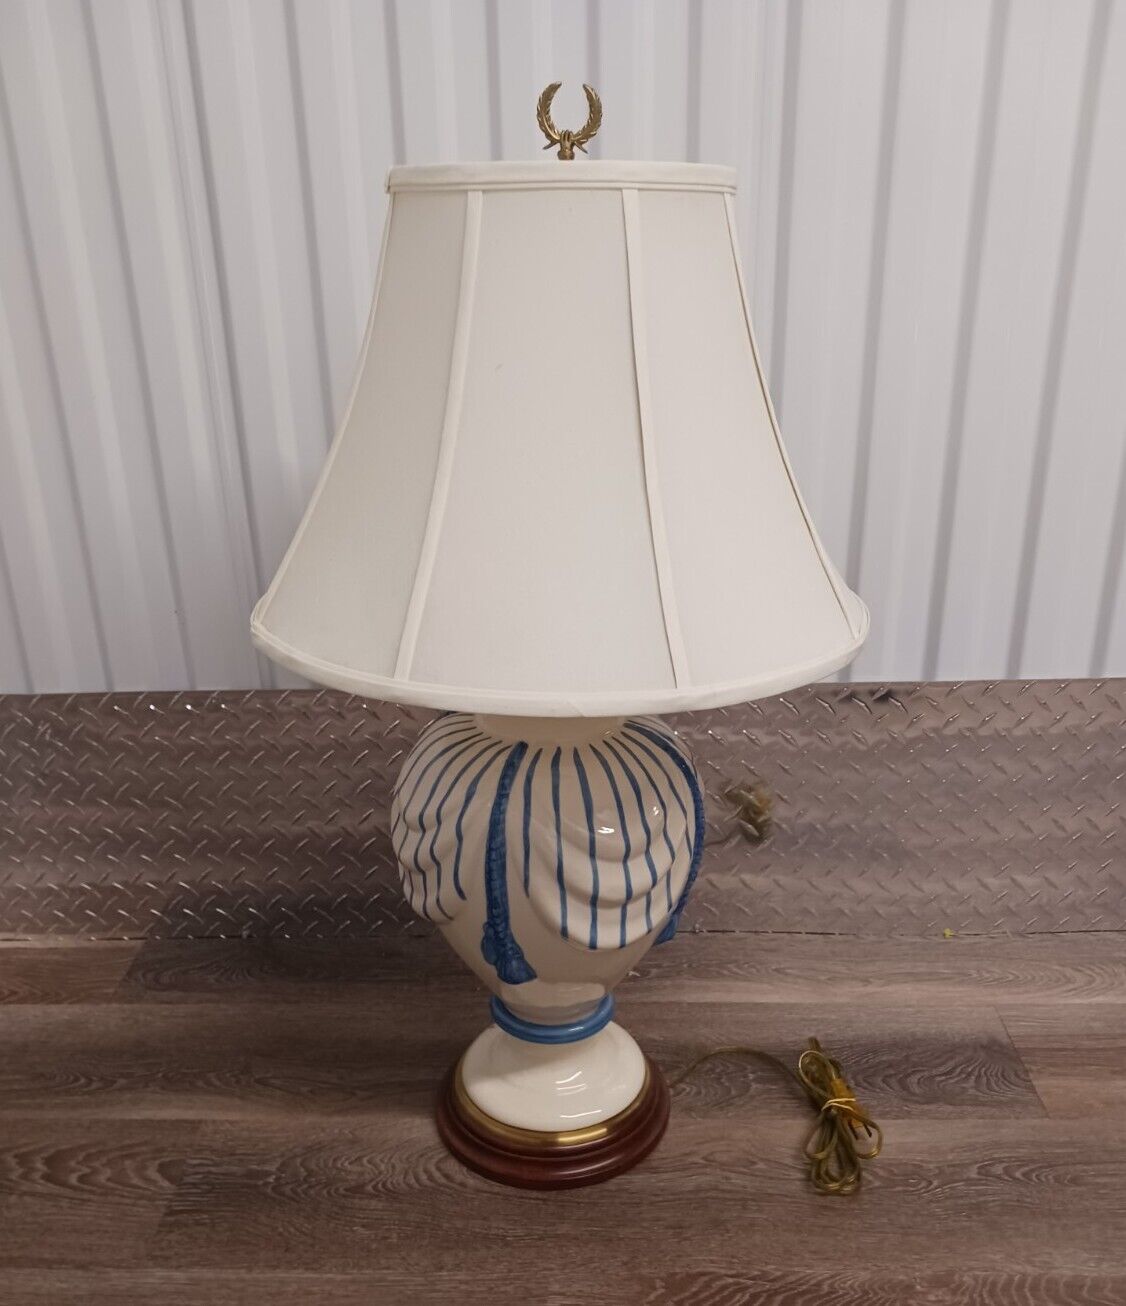 VINTAGE WILDWOOD DORTHY DRAPER LAMP With Shade + Finial Rare  Gorgeous 